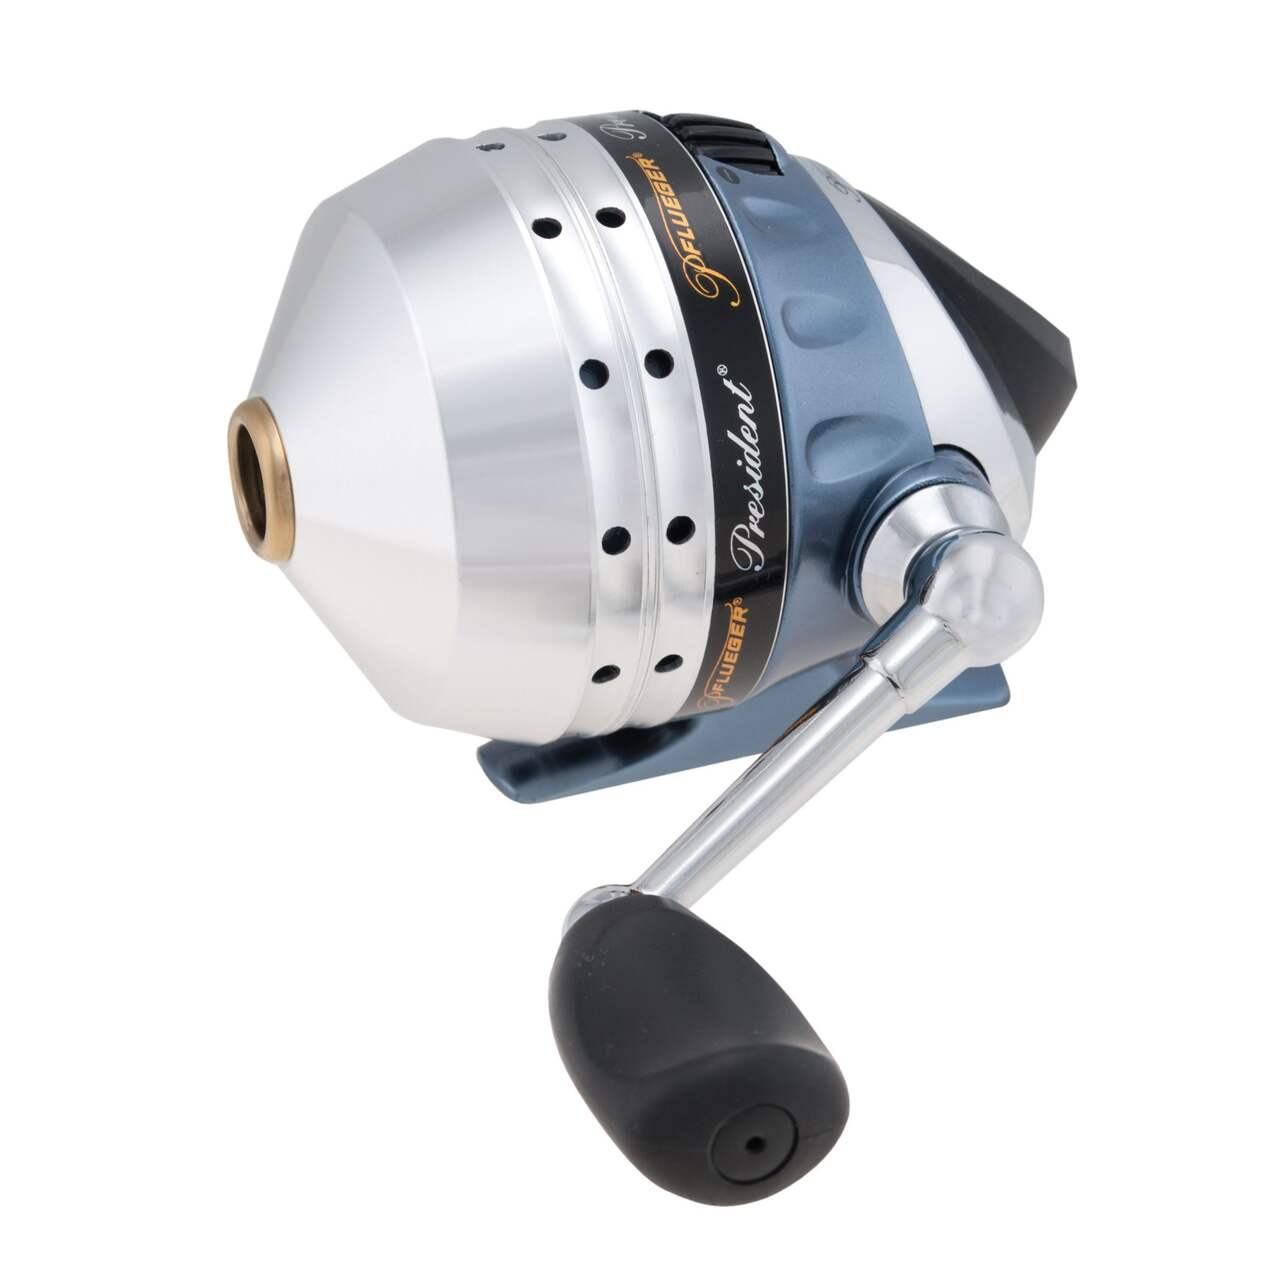 https://media-www.canadiantire.ca/product/playing/fishing/fishing-equipment/0775276/pfleuger-president-spin-cast-reel-size-10-7339d556-bd13-48a1-a883-5778e78c6b9b-jpgrendition.jpg?imdensity=1&imwidth=1244&impolicy=mZoom